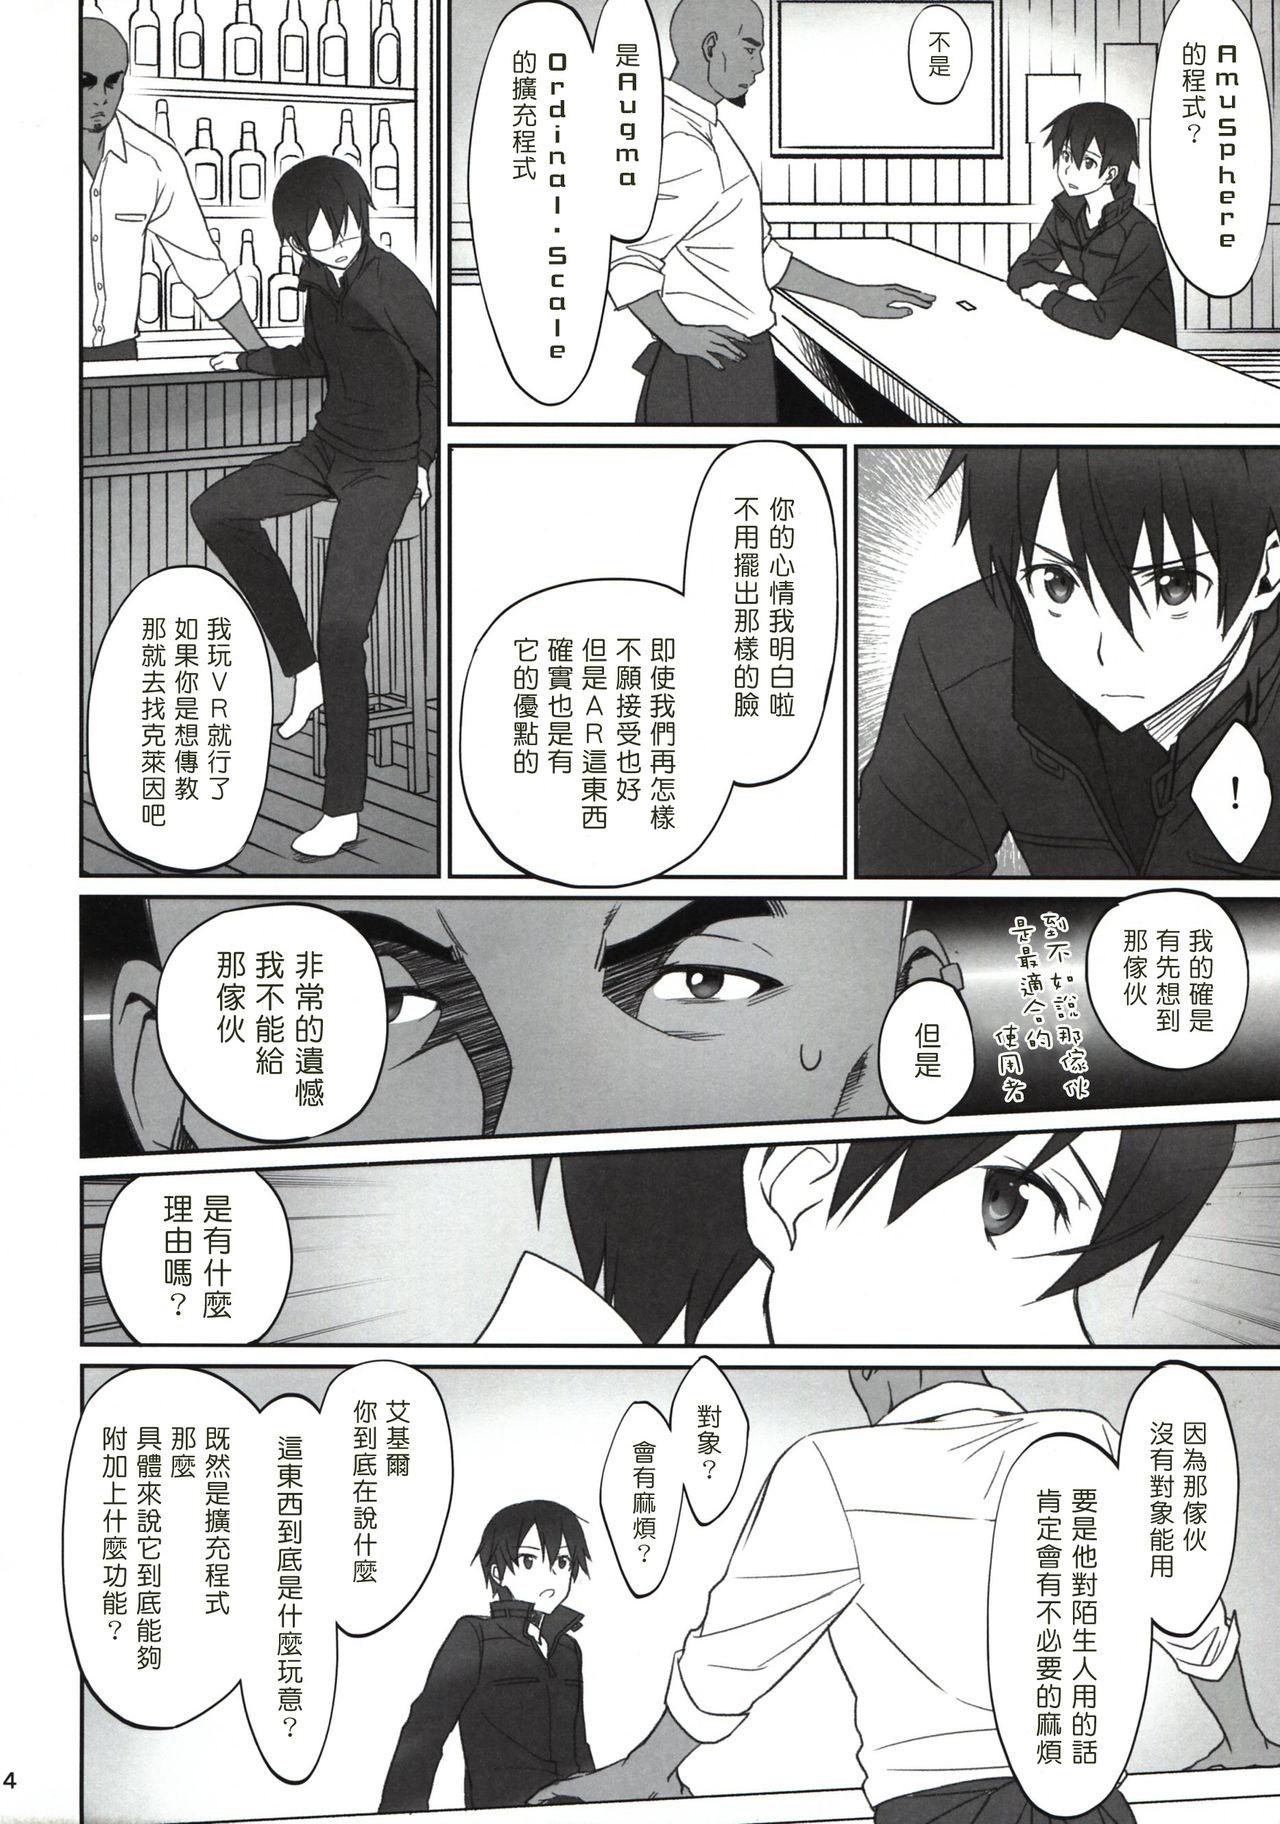 Sister Voyeuristic Disorder - Sword art online Muscles - Page 4